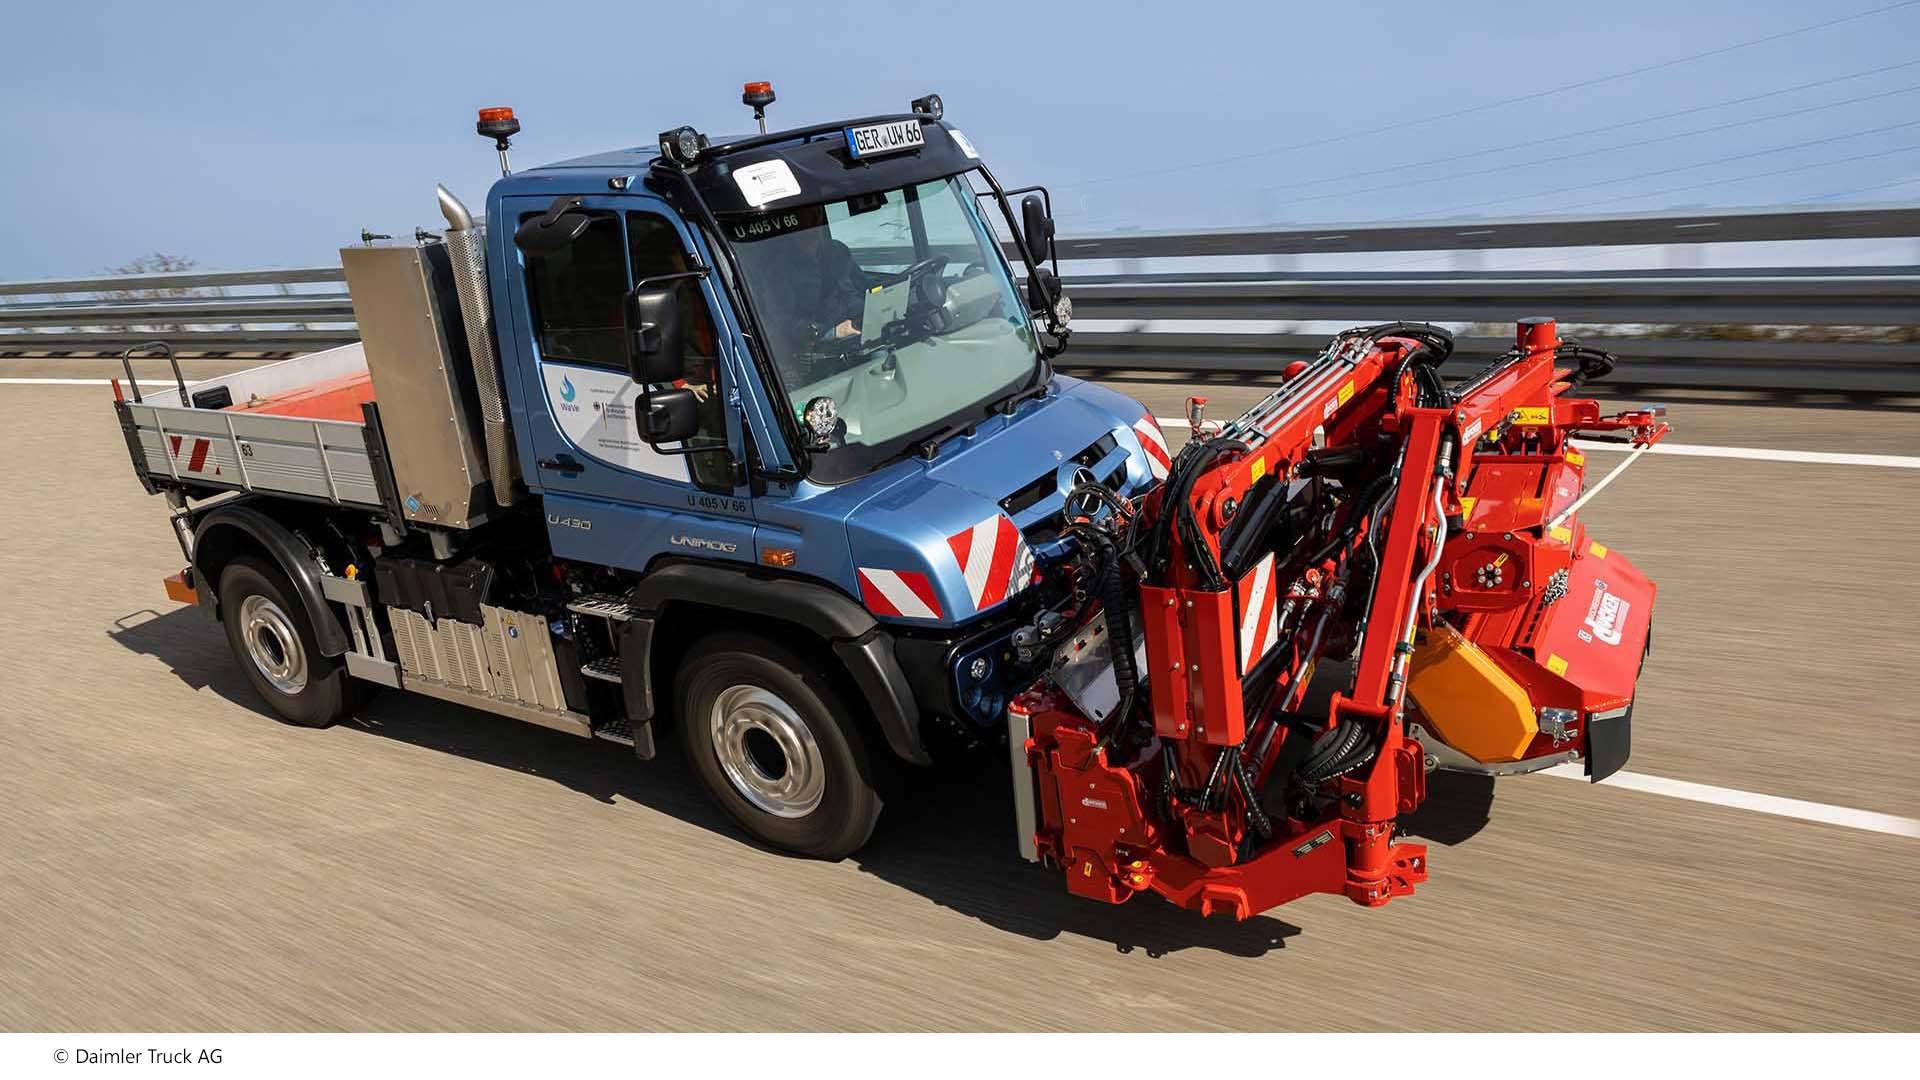 Prototype of the Unimog based on the U 430 with hydrogen-powered internal combustion engine.